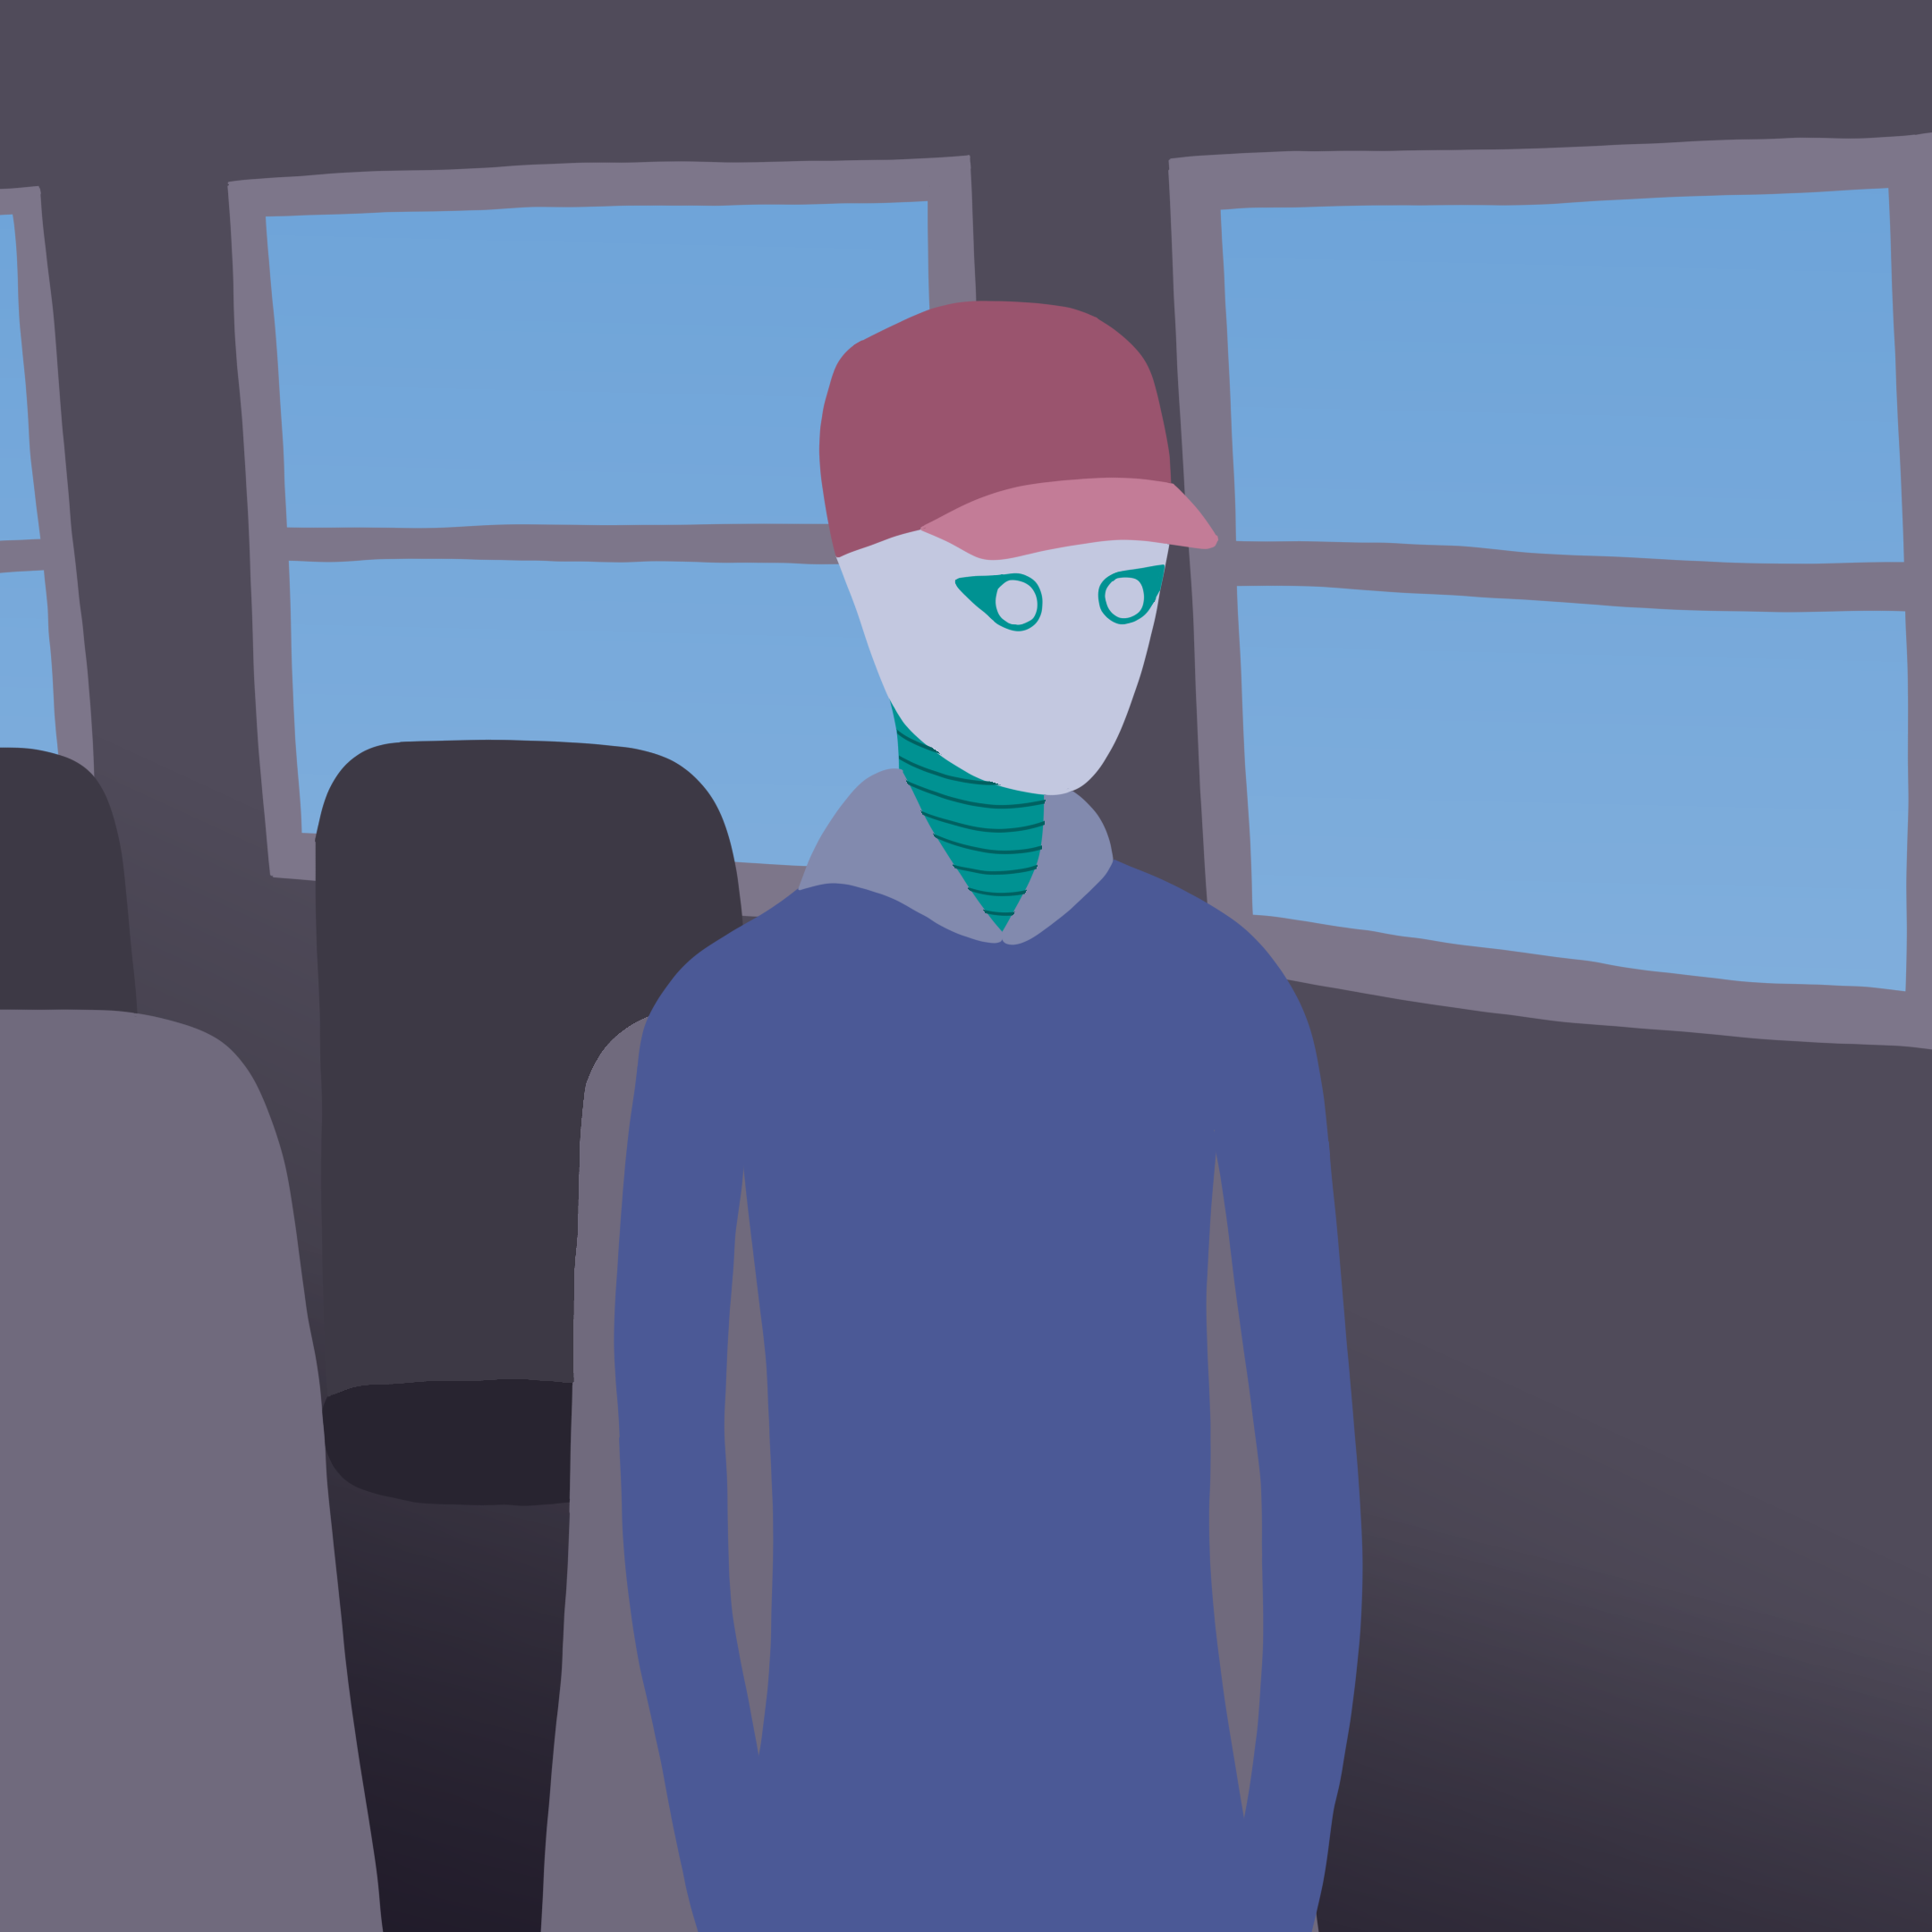 A robot named Rova sitting on the bus alone.